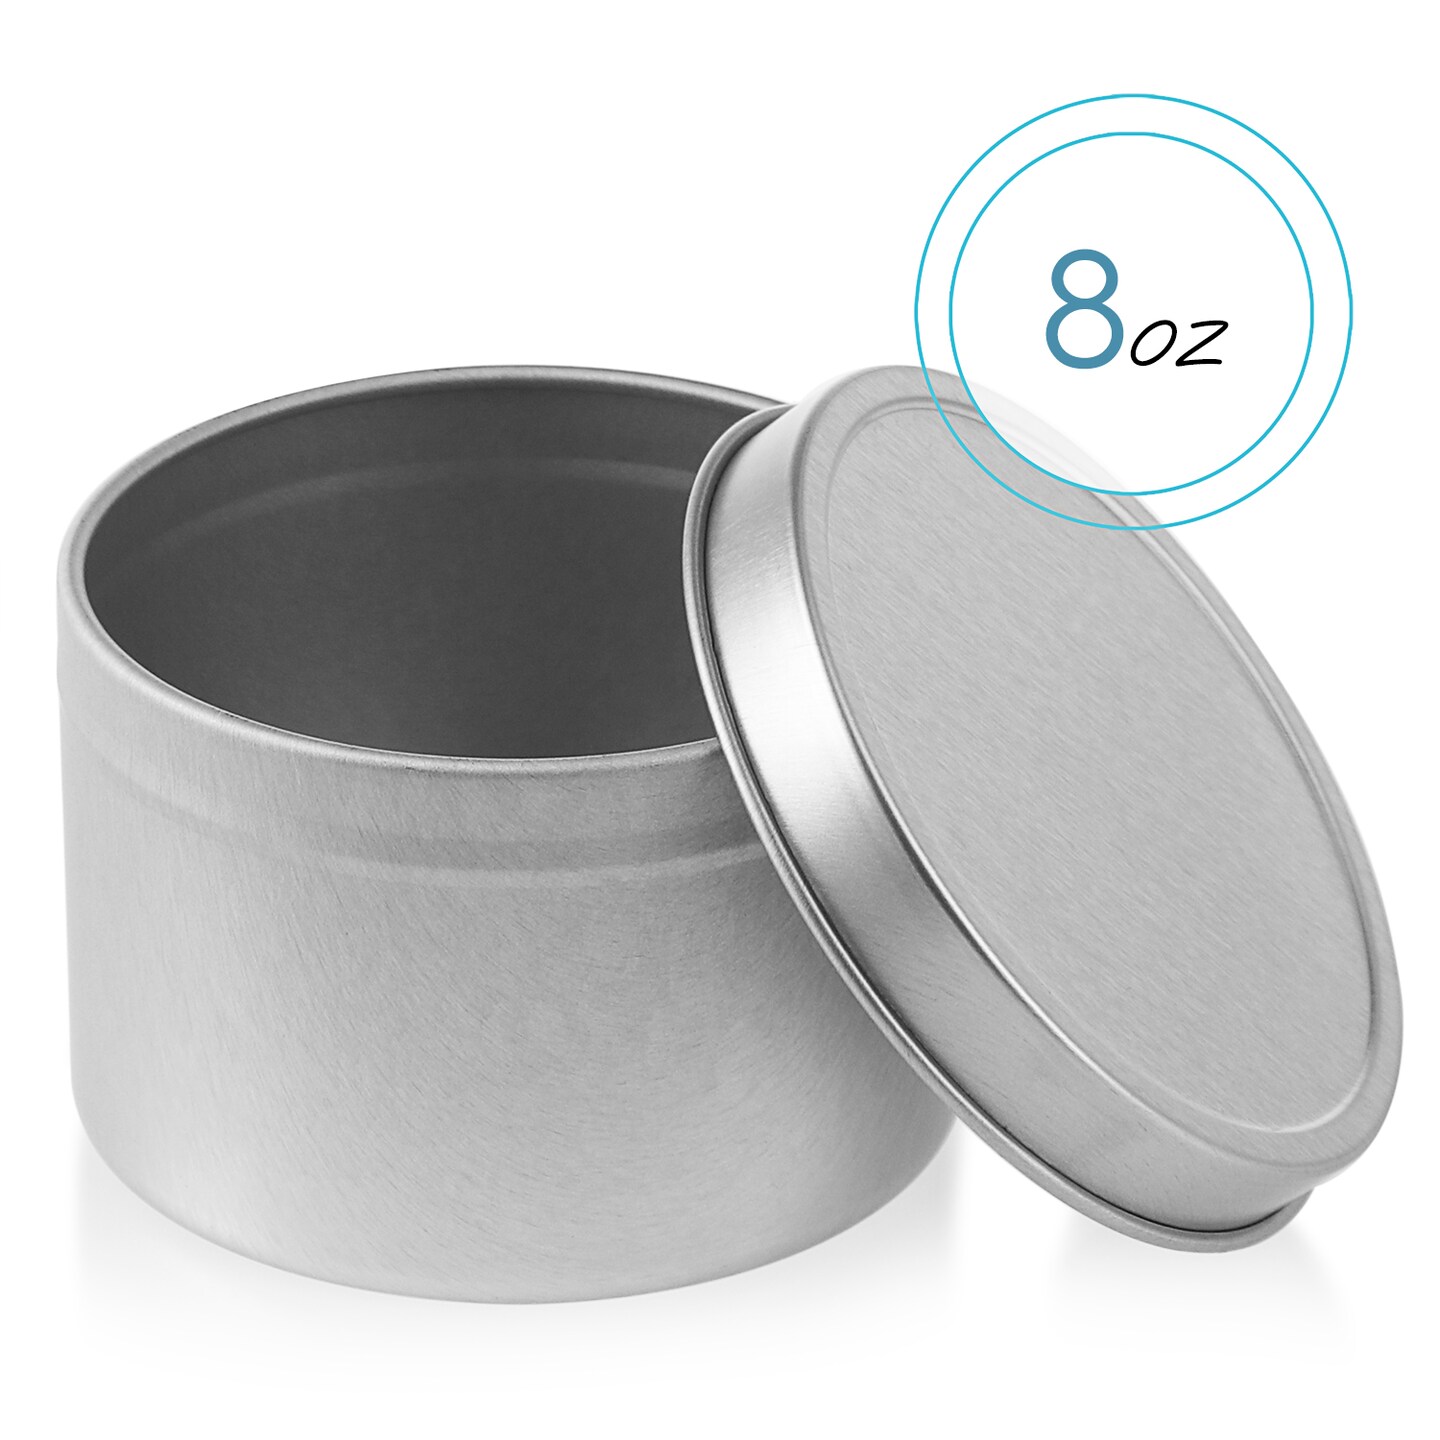 Hearth & Harbor Stainless Steel Candle Tins with Lids